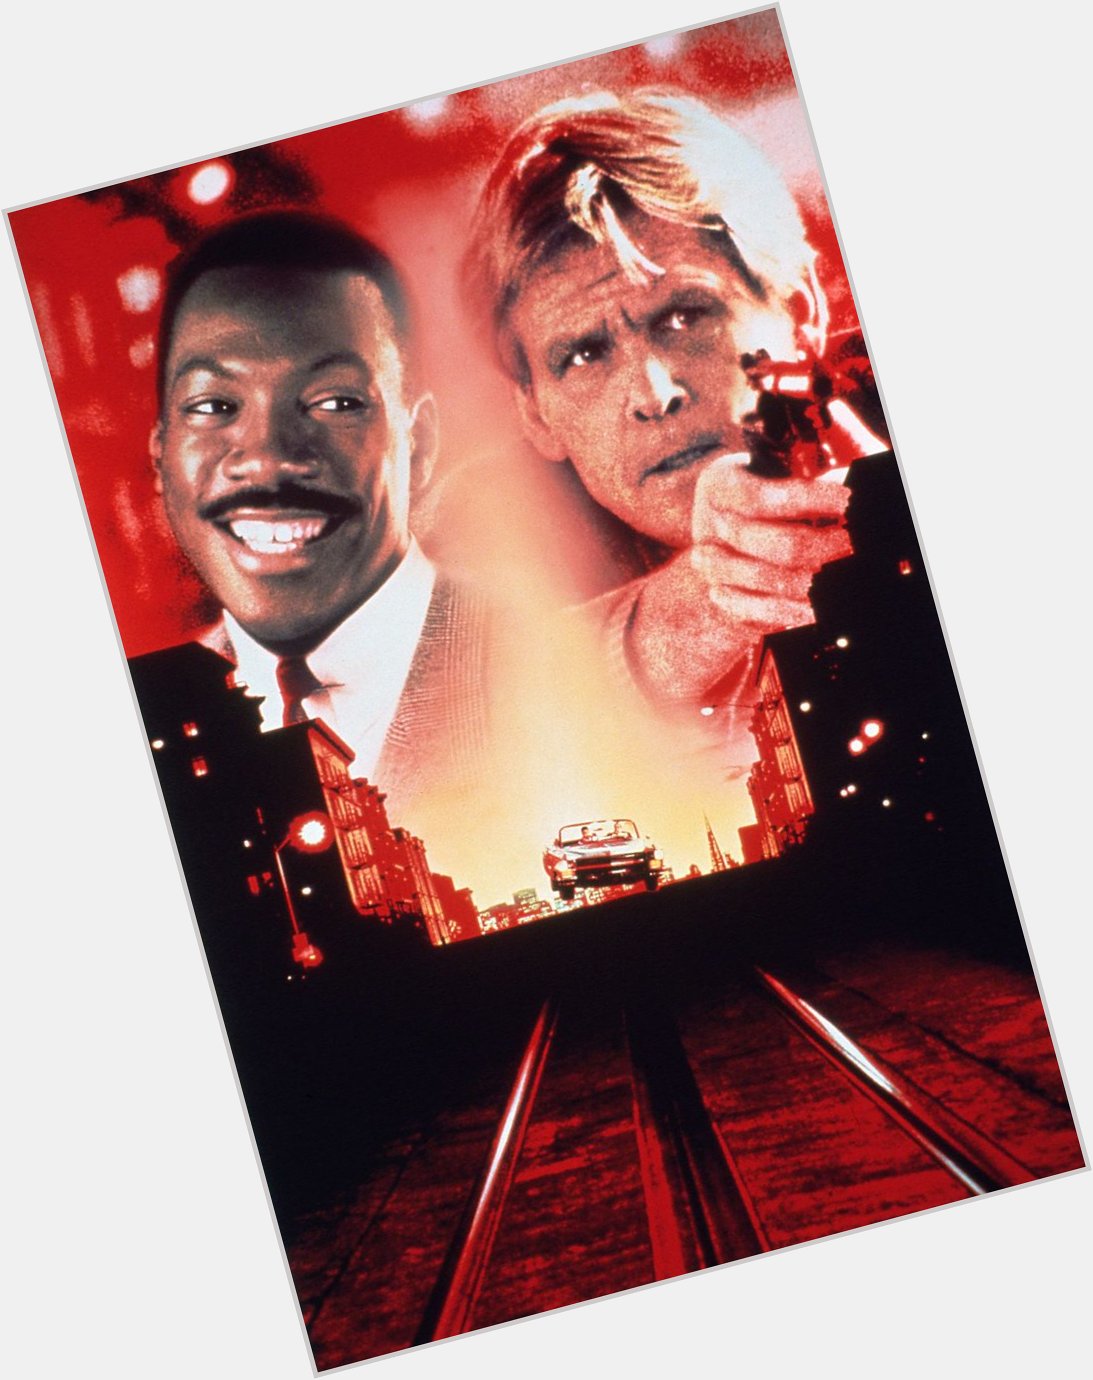 Another 48 Hrs.  (1990)
Happy Birthday, Nick Nolte! 